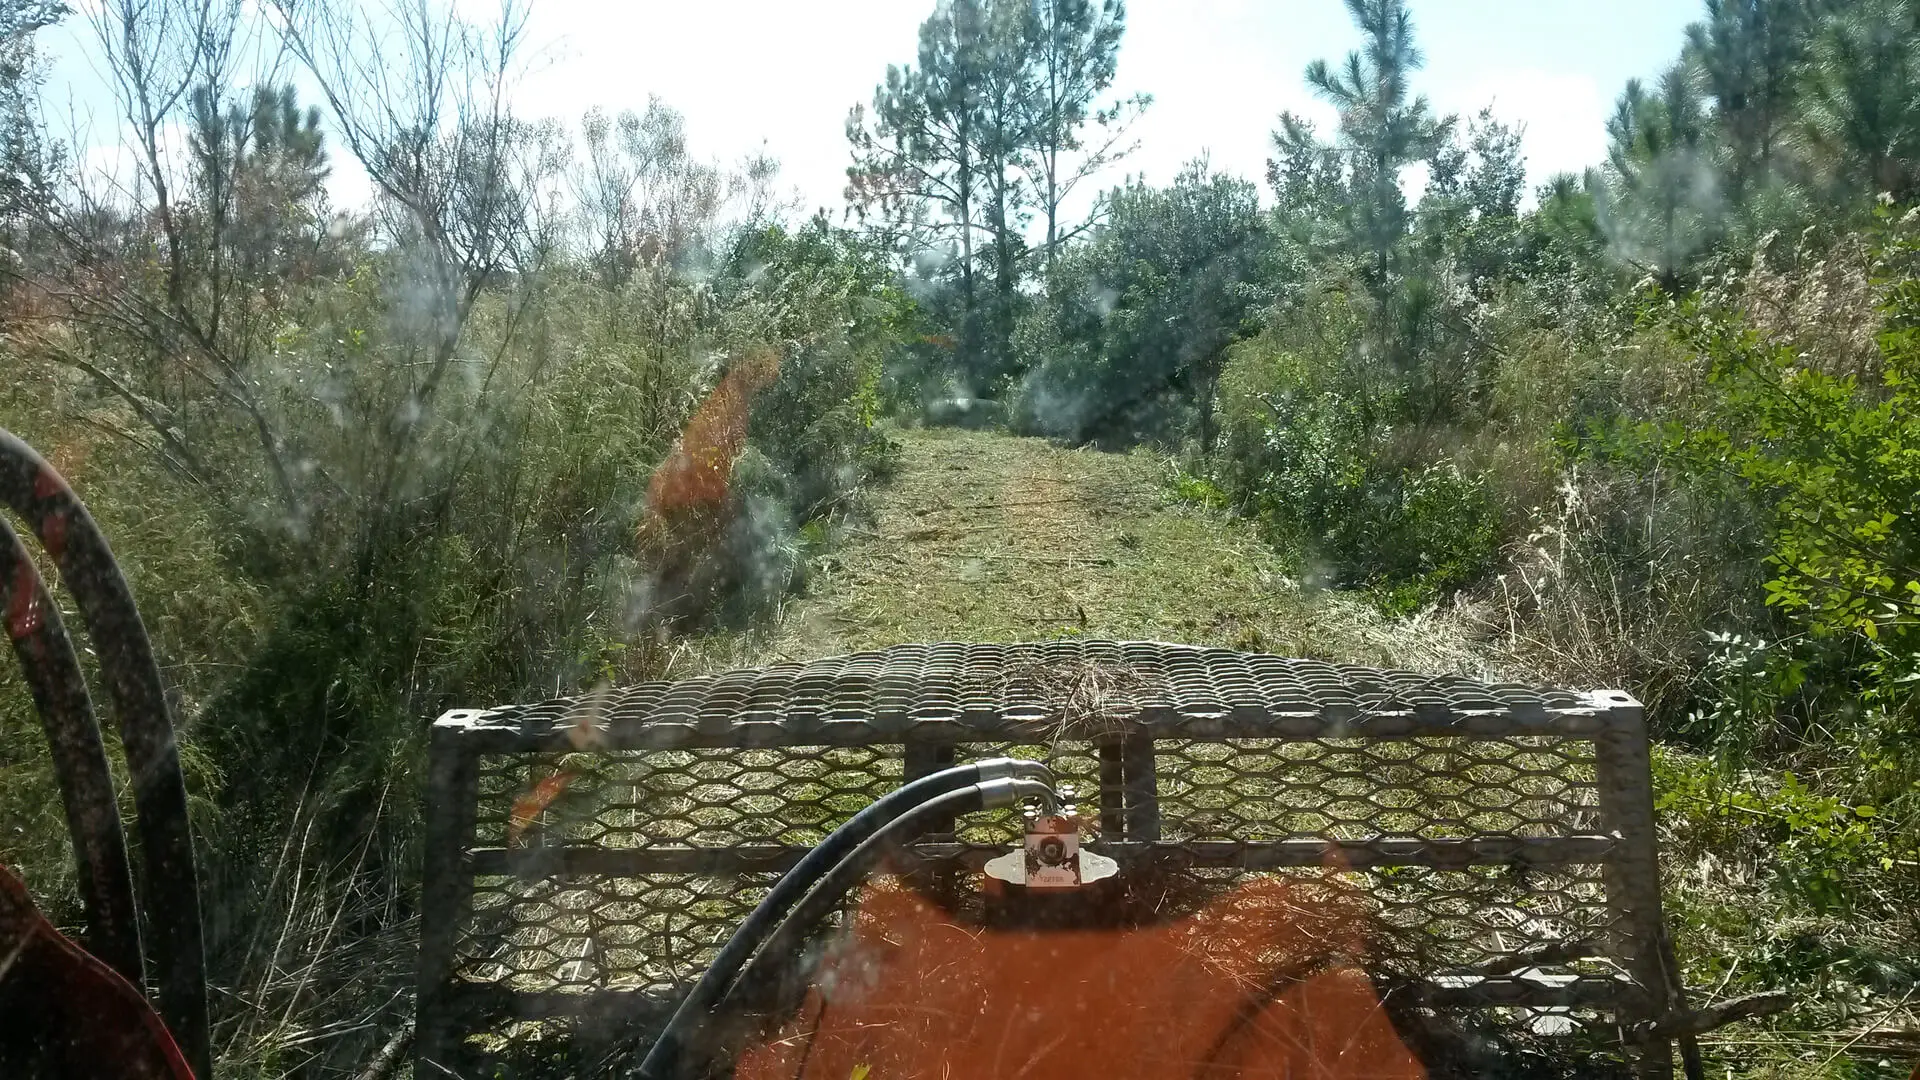 a view from the front of a tractor on a dirt path through trees